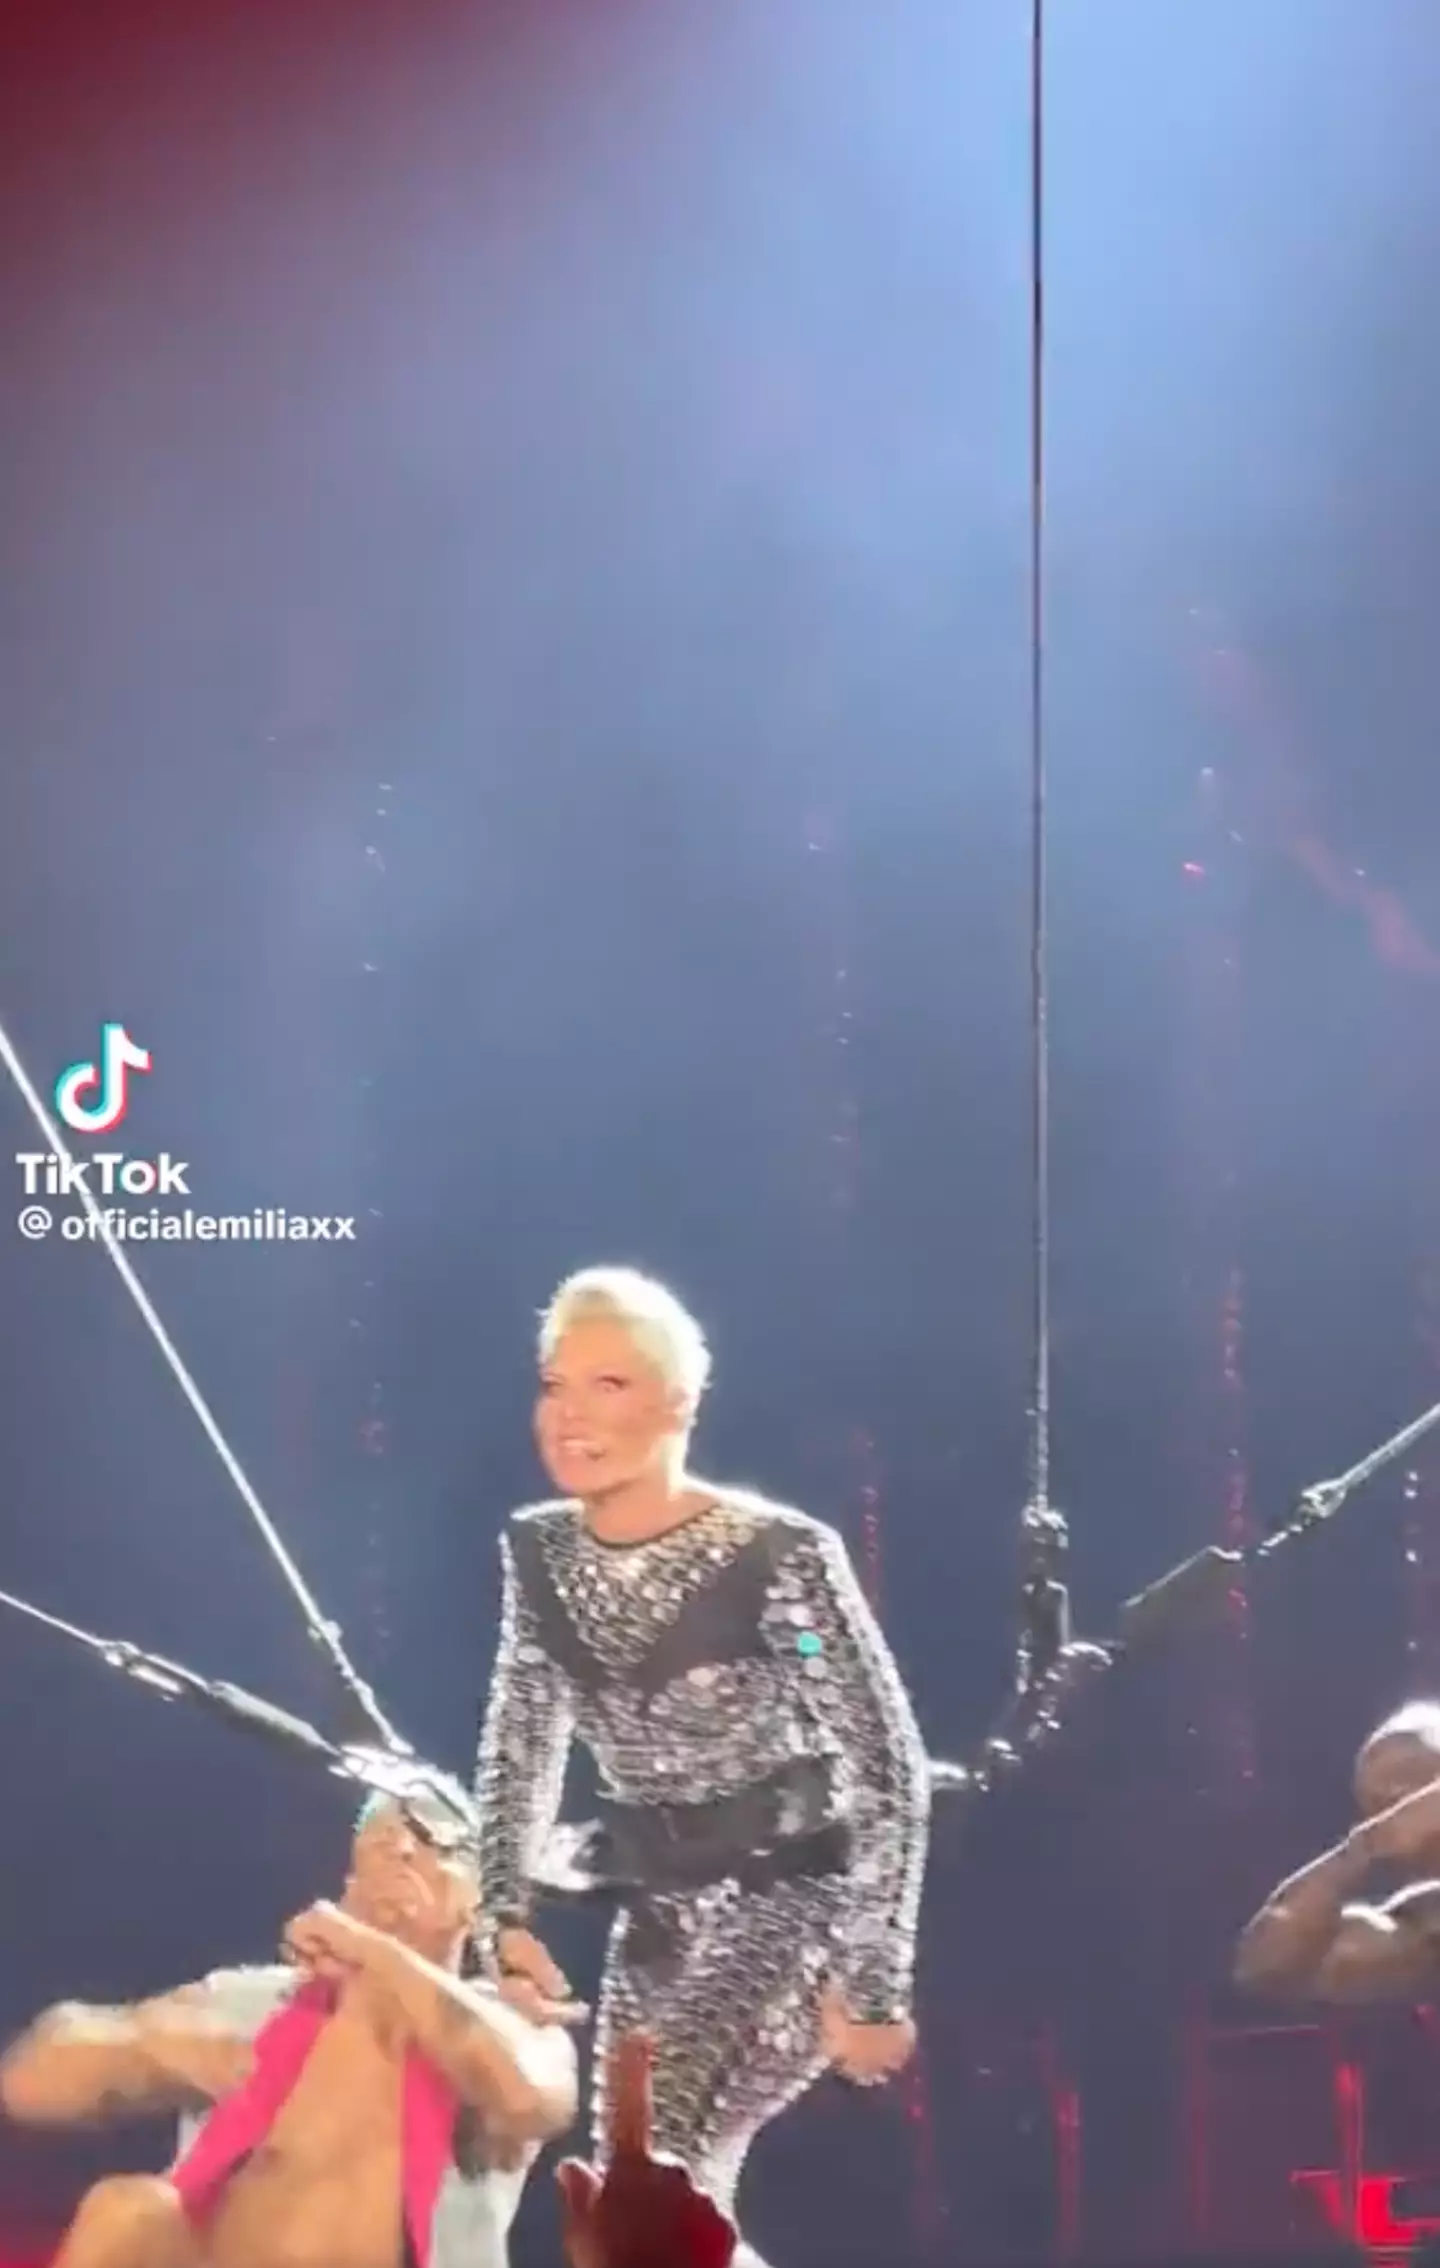 P!nk is known for her aerial tricks during her live performances.